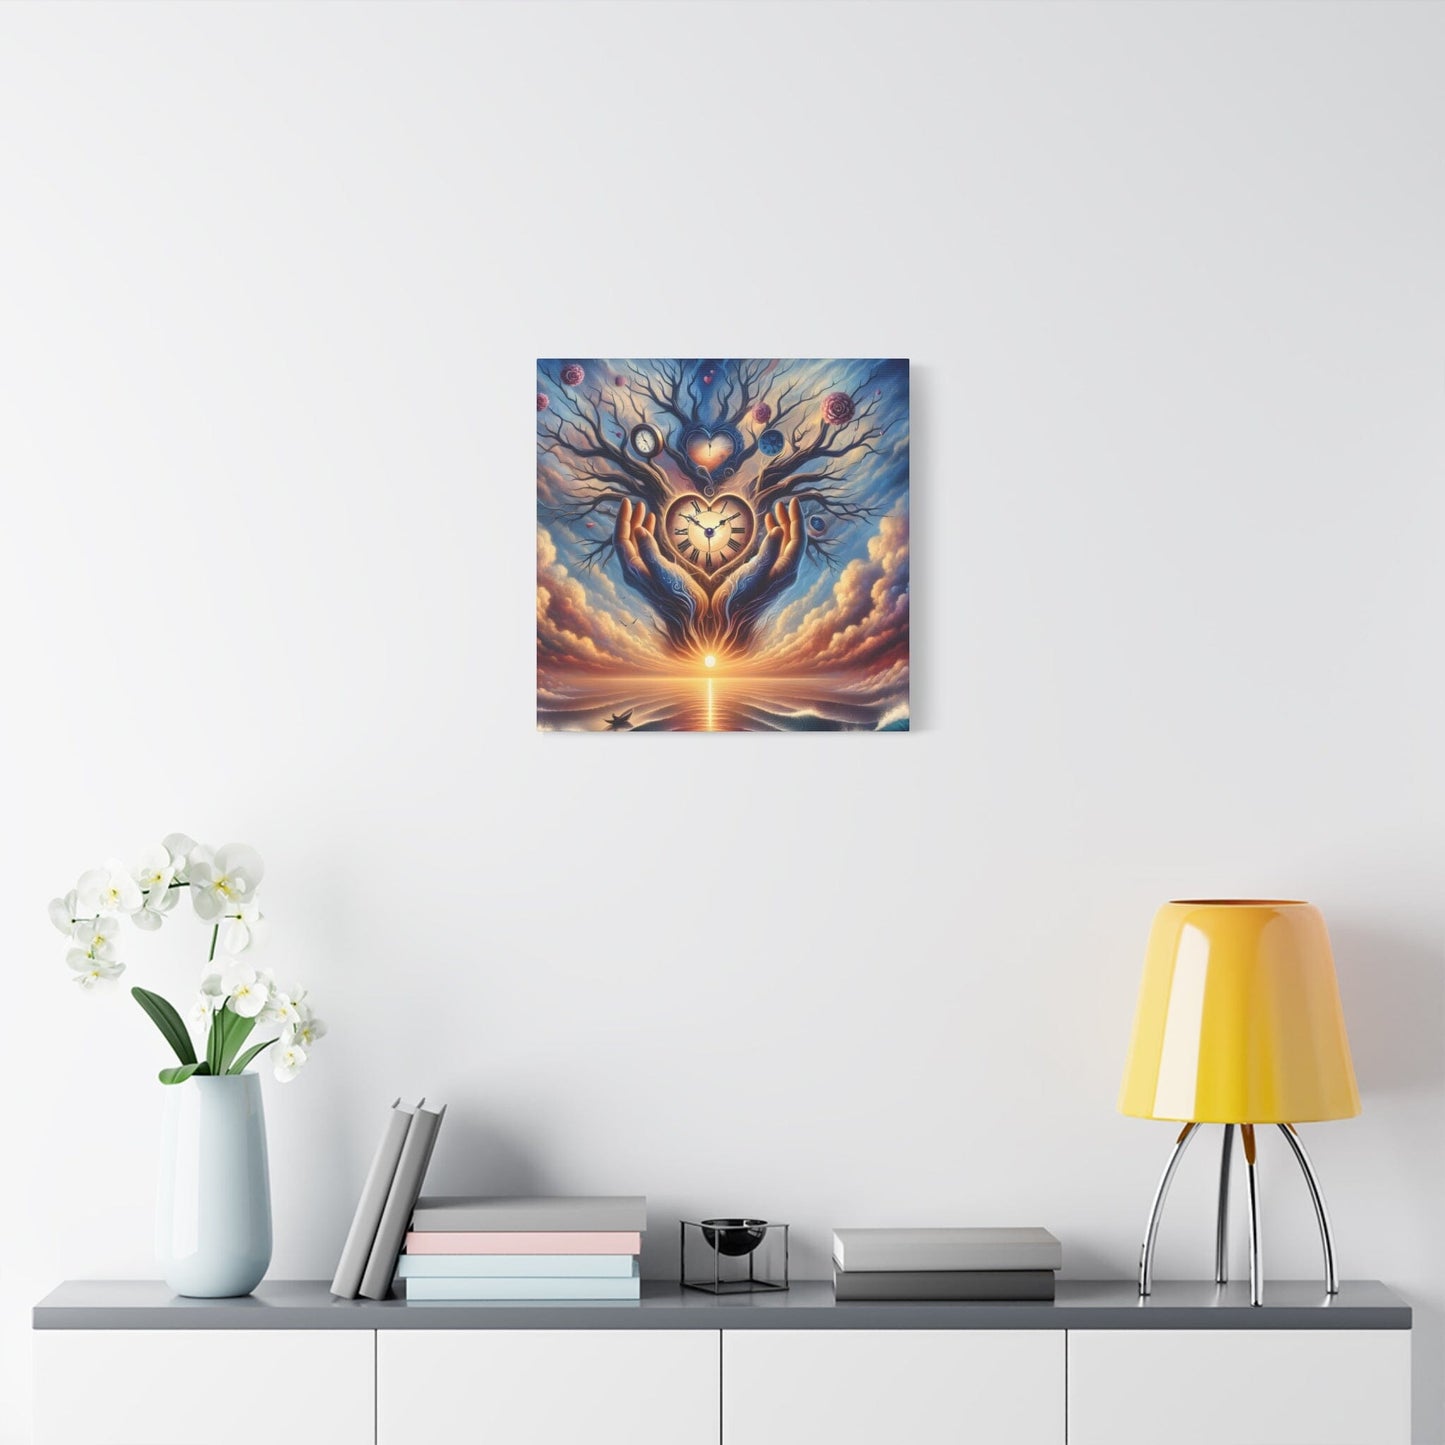 Maya Summers. Eternal Connection. Exclusive Graphic Art Canvas.